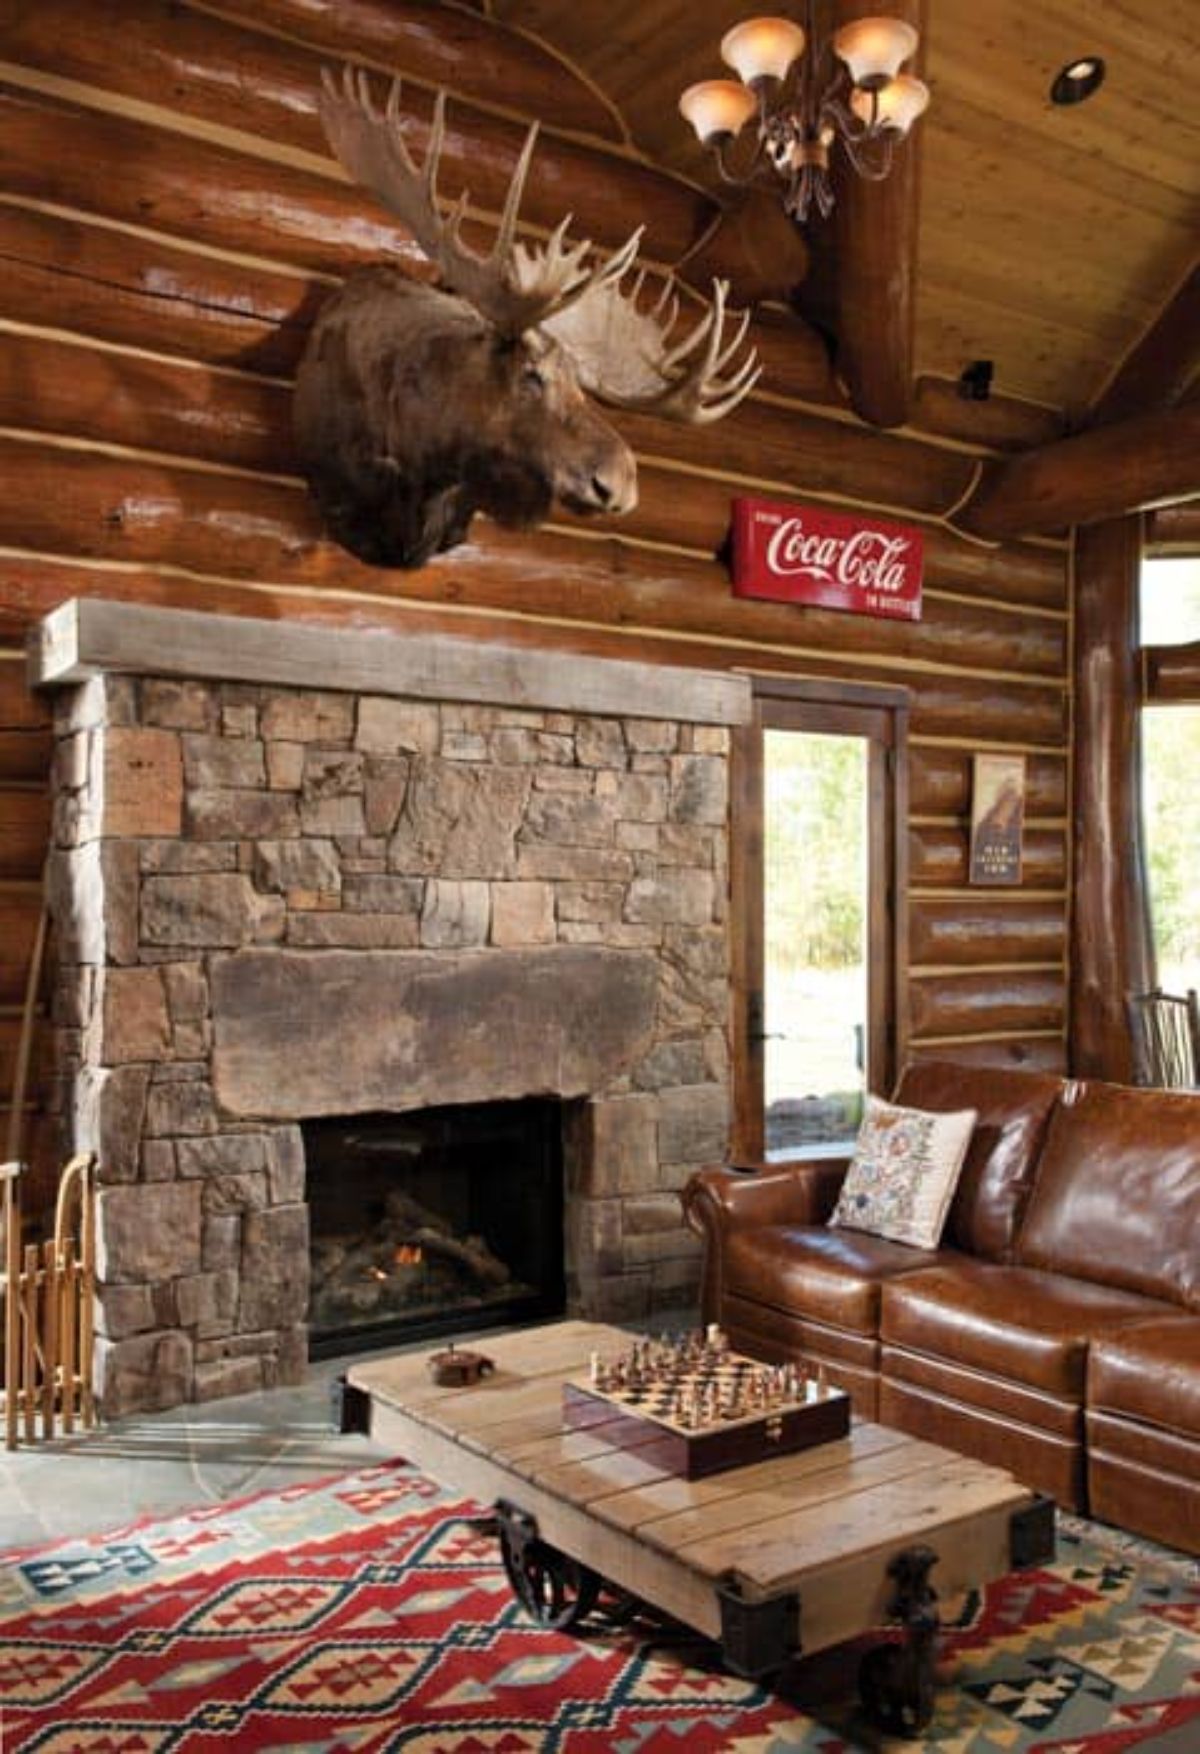 brown leather sofa in front of stone fireplace with moose head